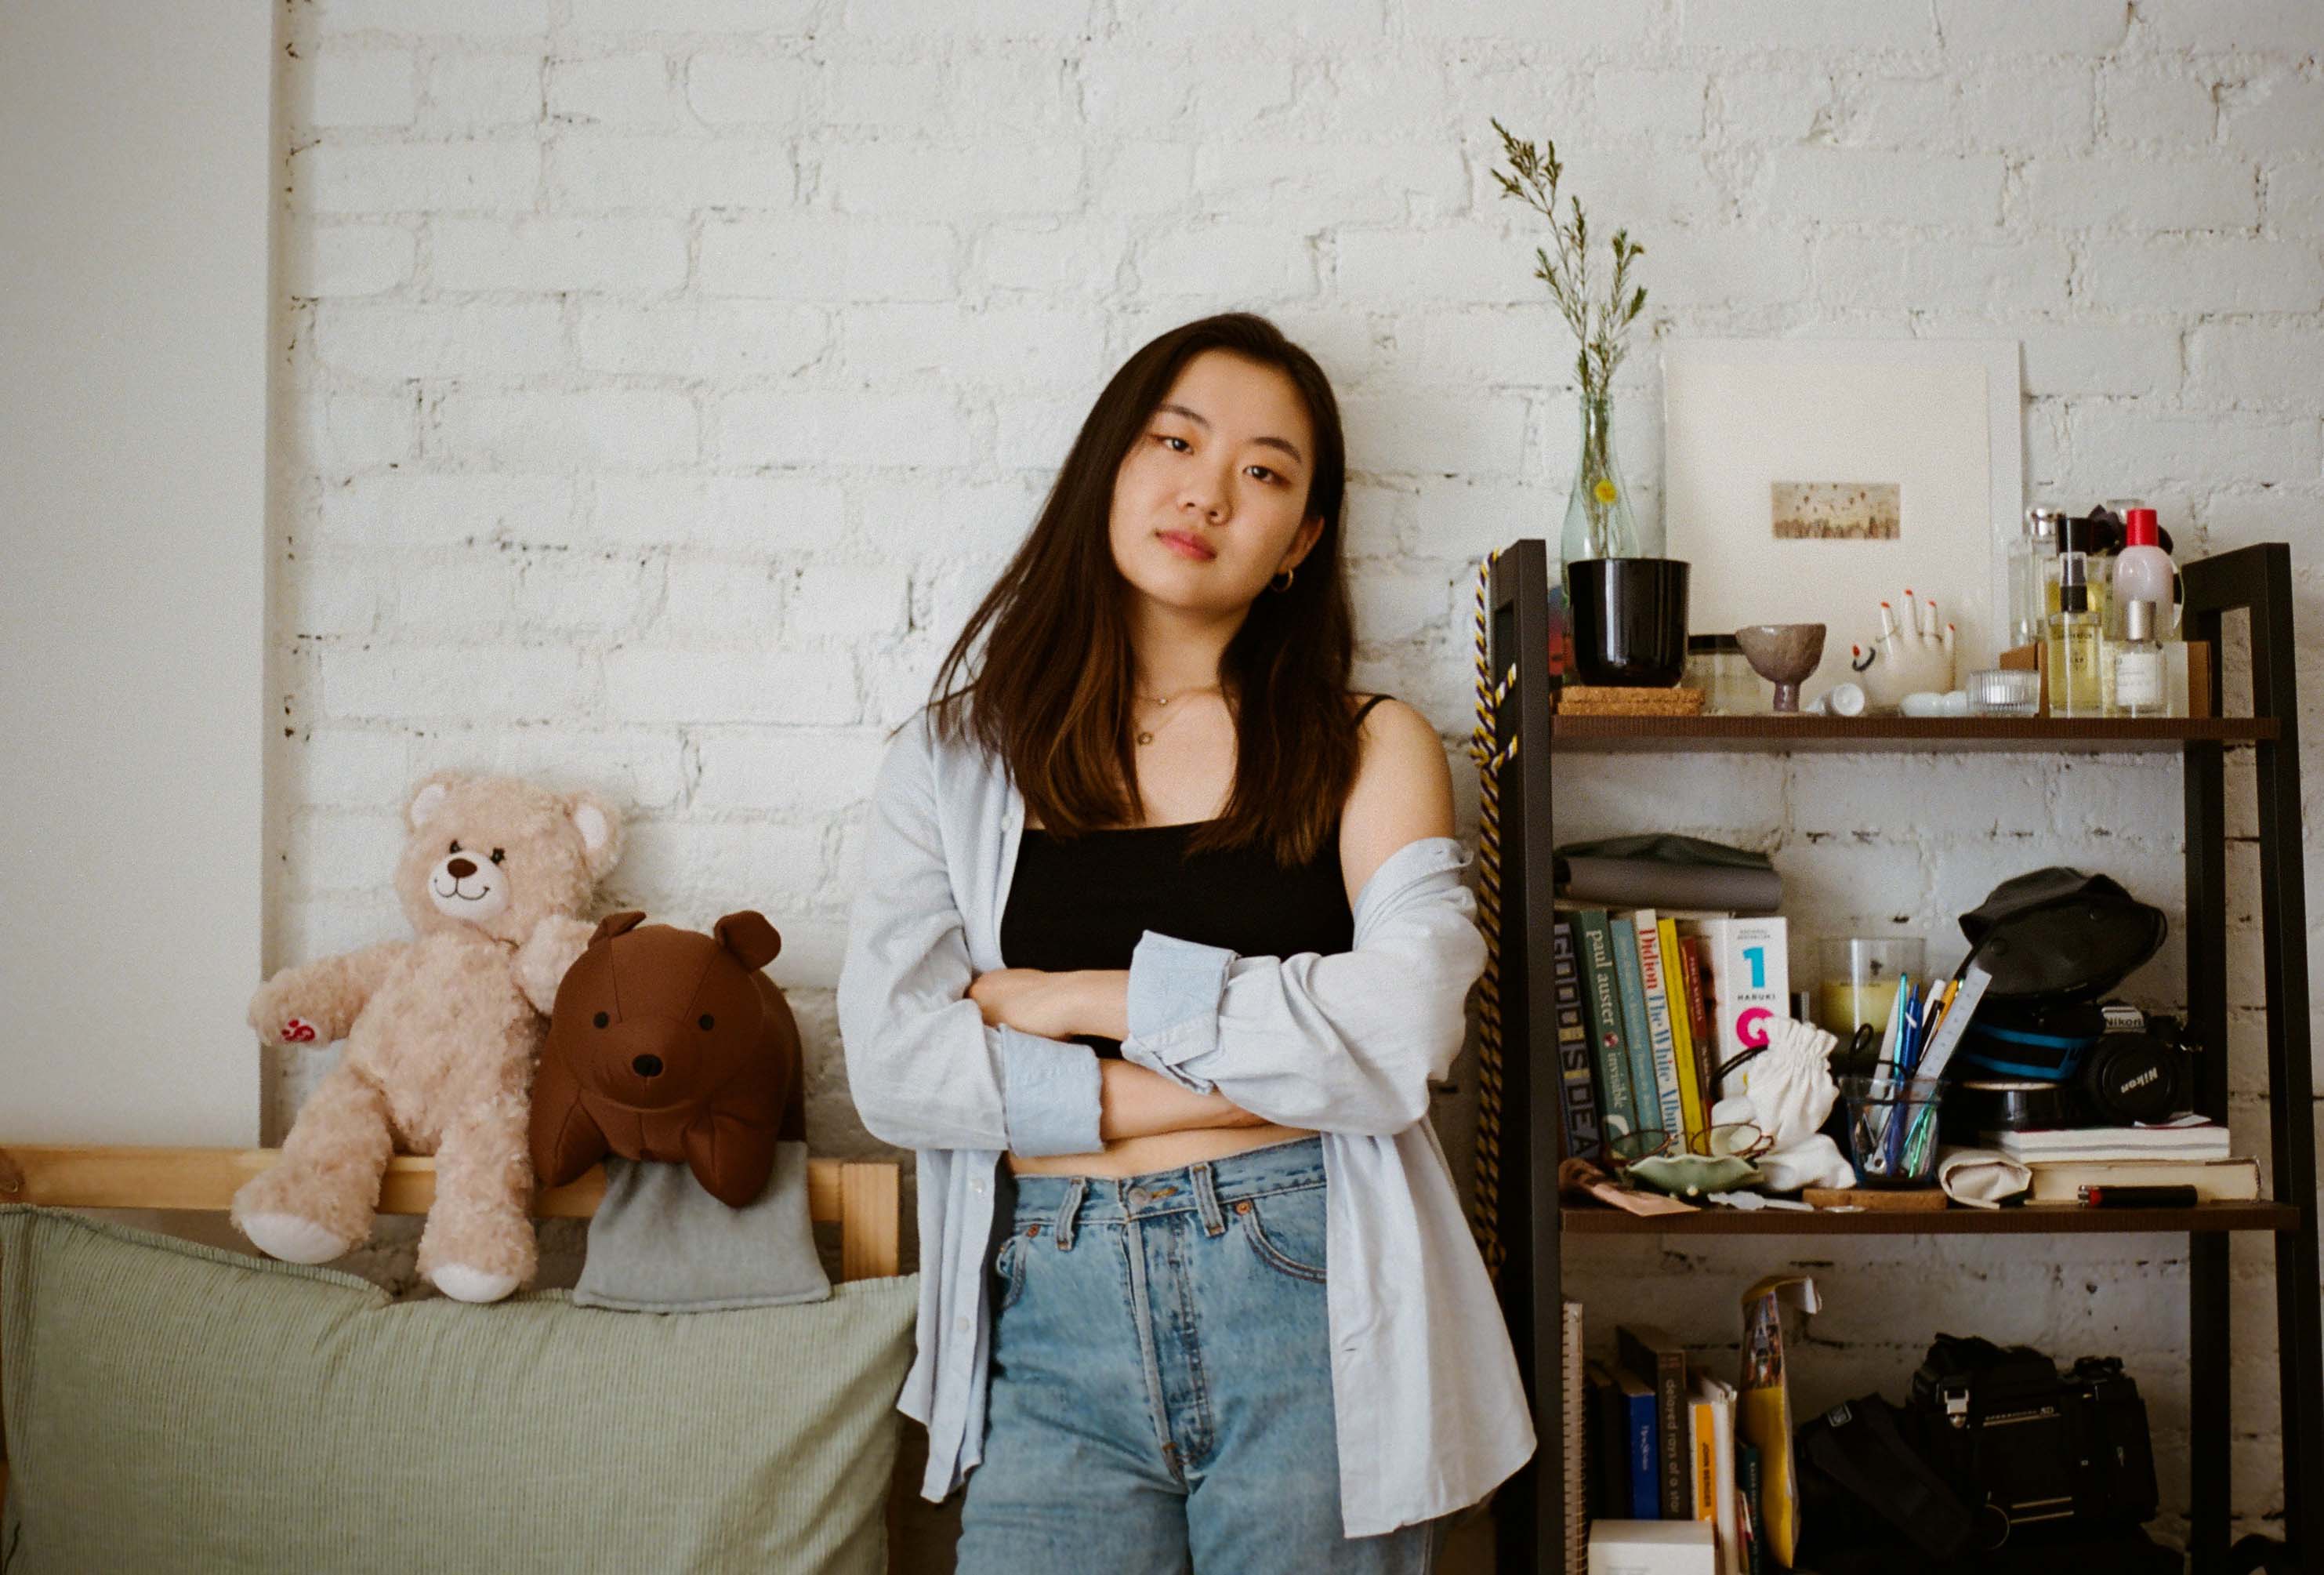 a portait of girl in her bedroom next to shelves with books and stuffed animals